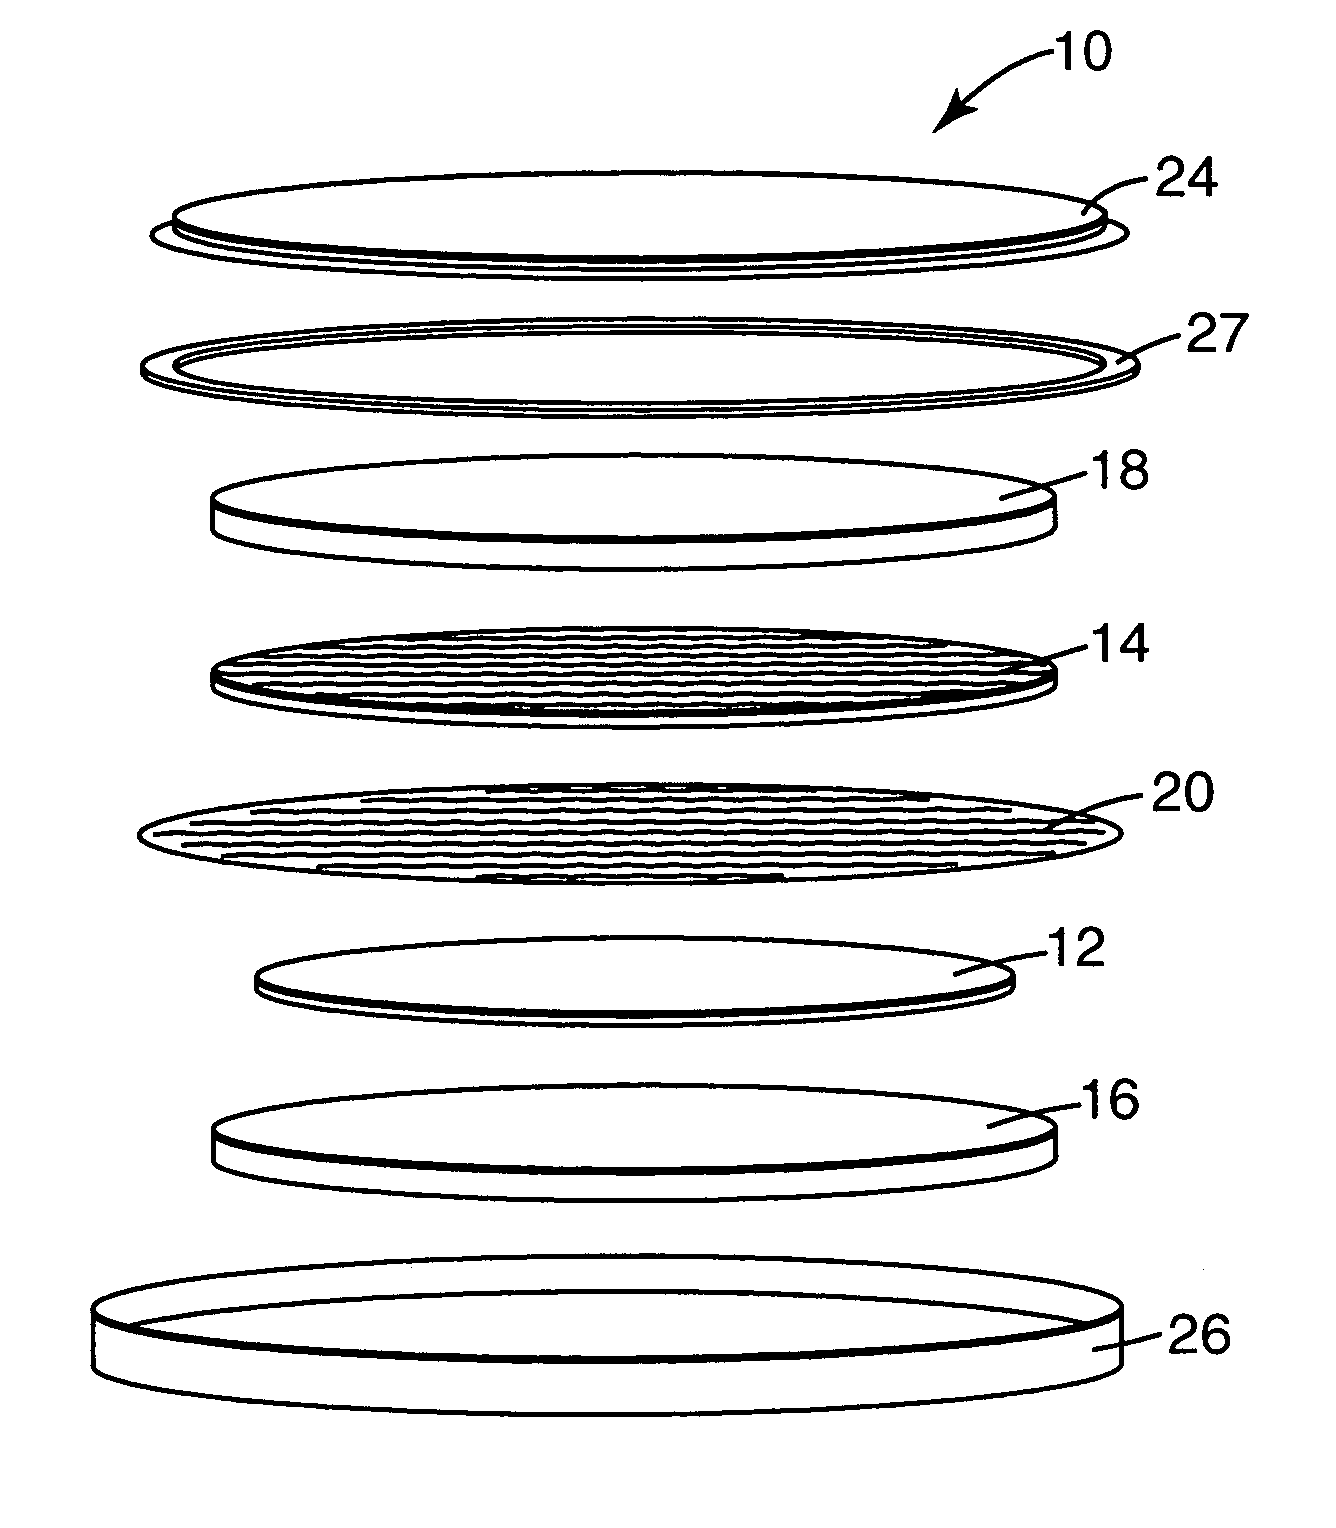 Redox shuttle for rechargeable lithium-ion cell